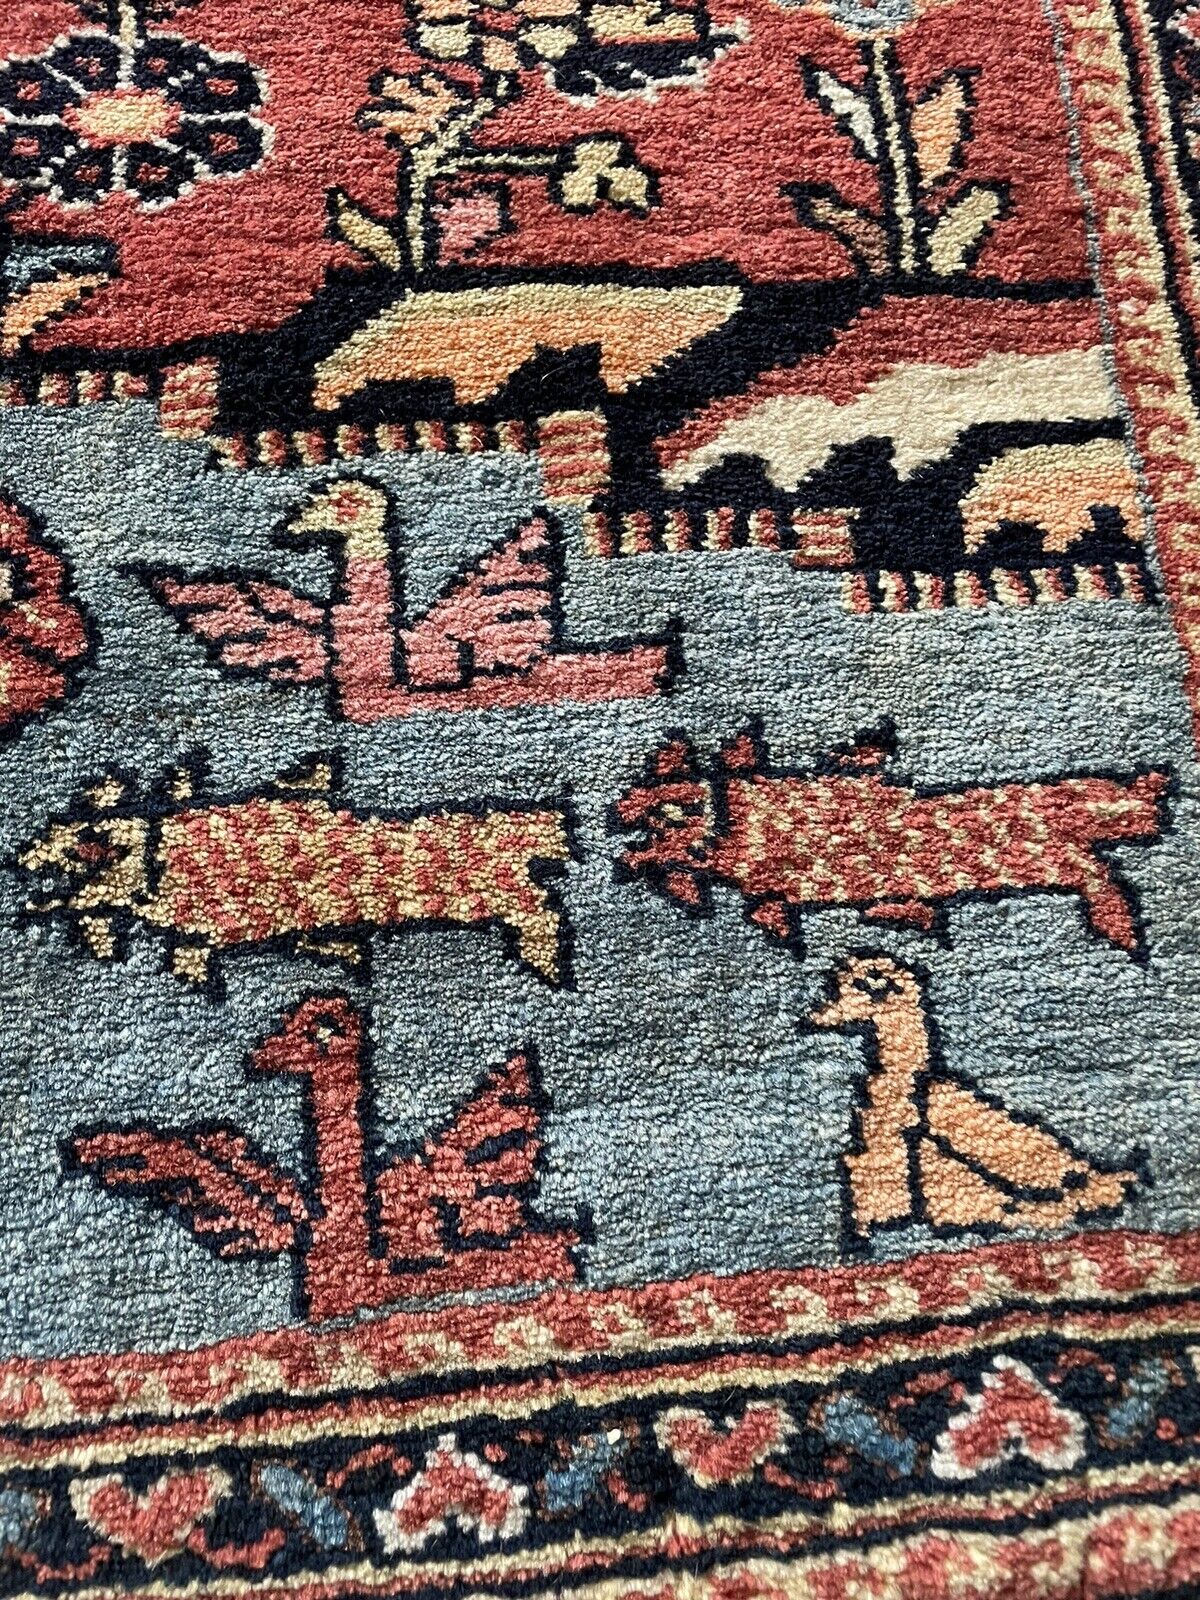 Close-up of Persian-style charm on Handmade Antique Persian Lilihan Collectible Rug - Detailed view showcasing the Persian-style charm and elegance of the rug.